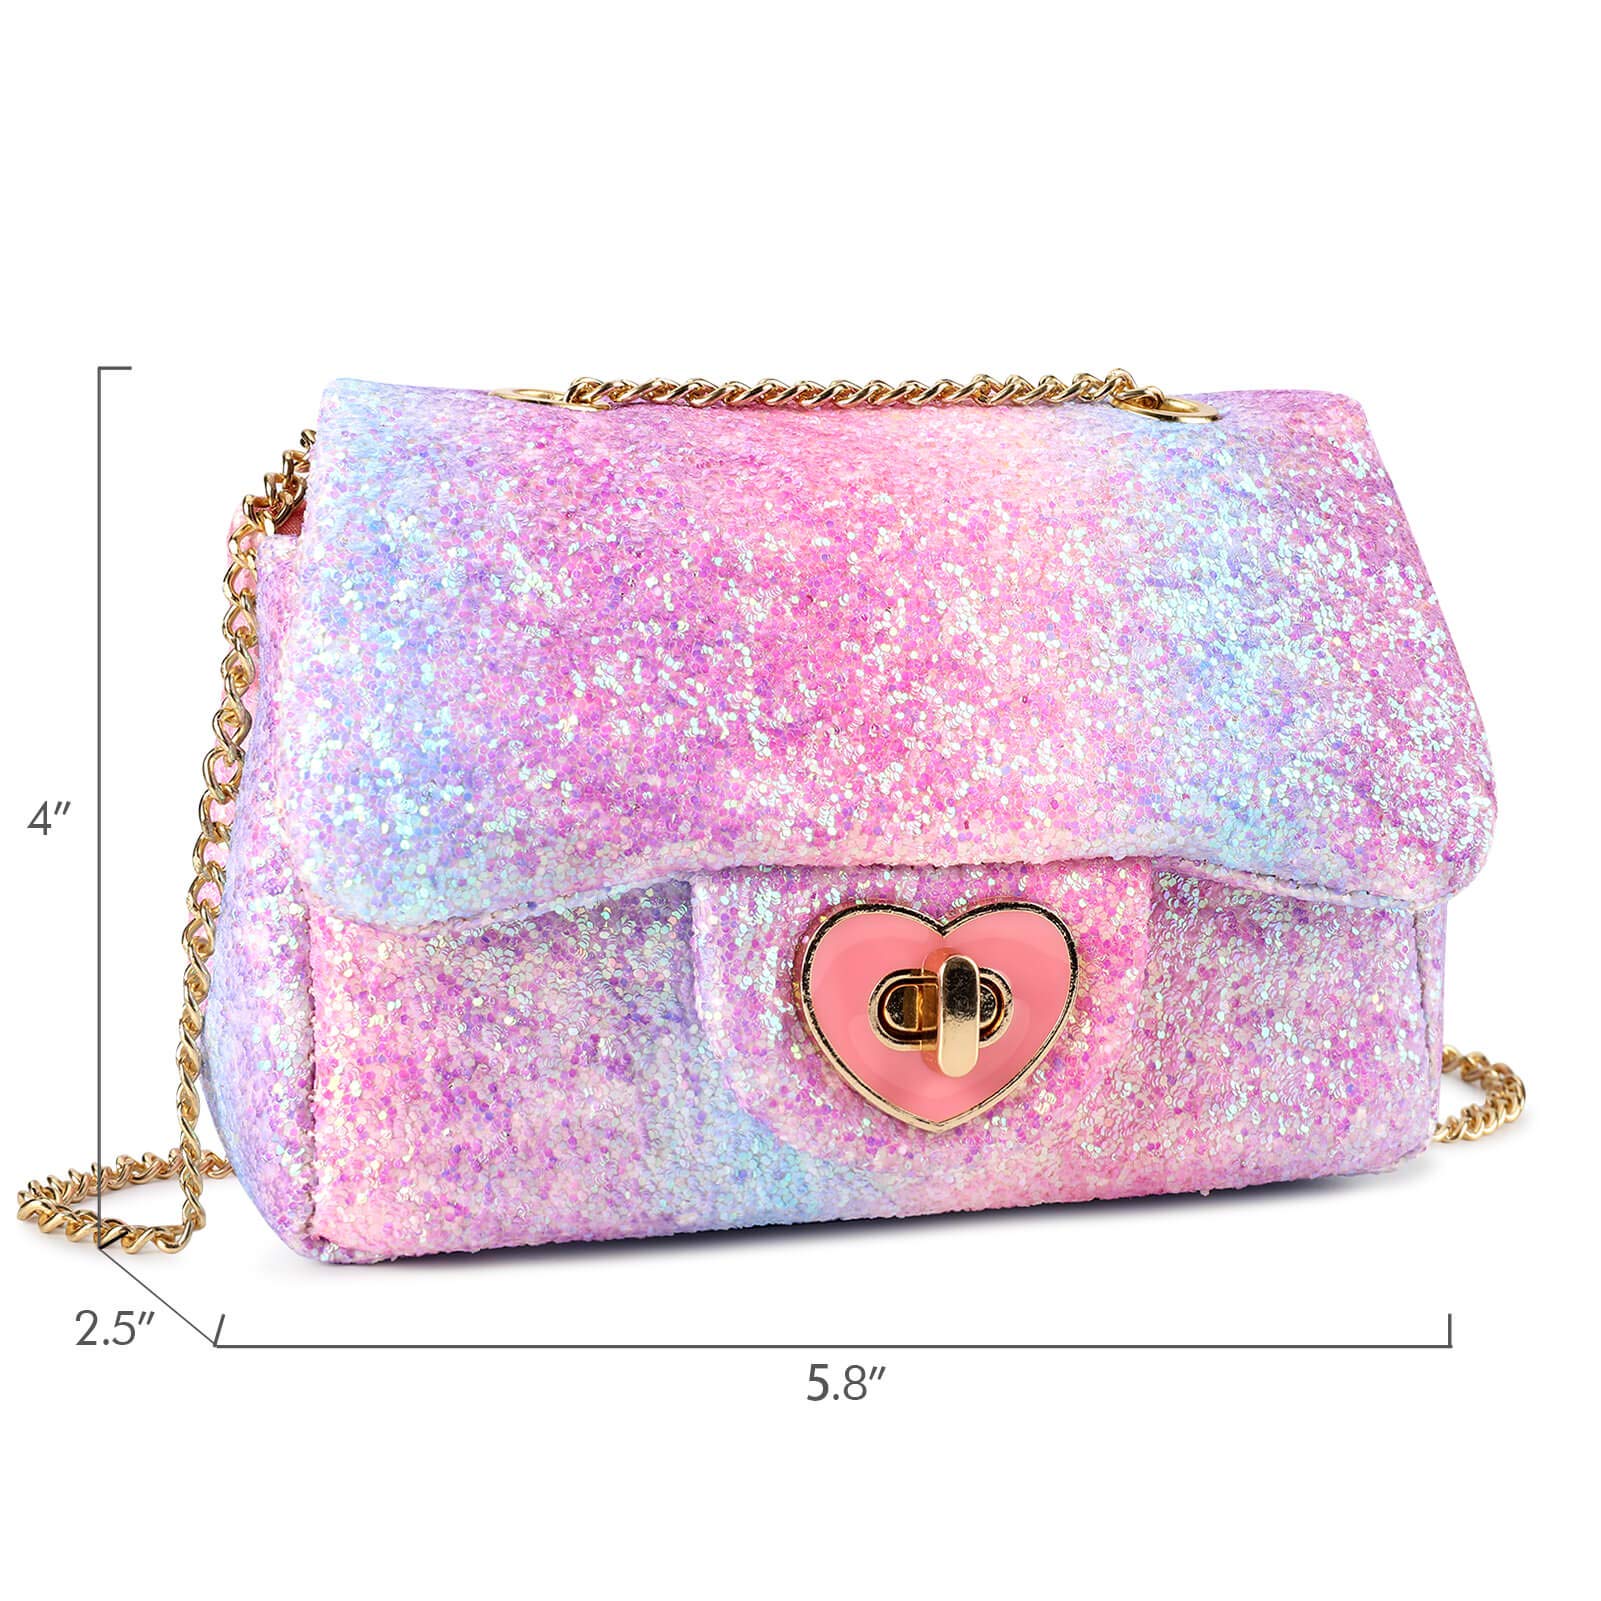 CMK Trendy Kids Girls Crossbody Purse for Kids (Pink/Purple Rainbow  Glitter), Small : Amazon.in: Bags, Wallets and Luggage